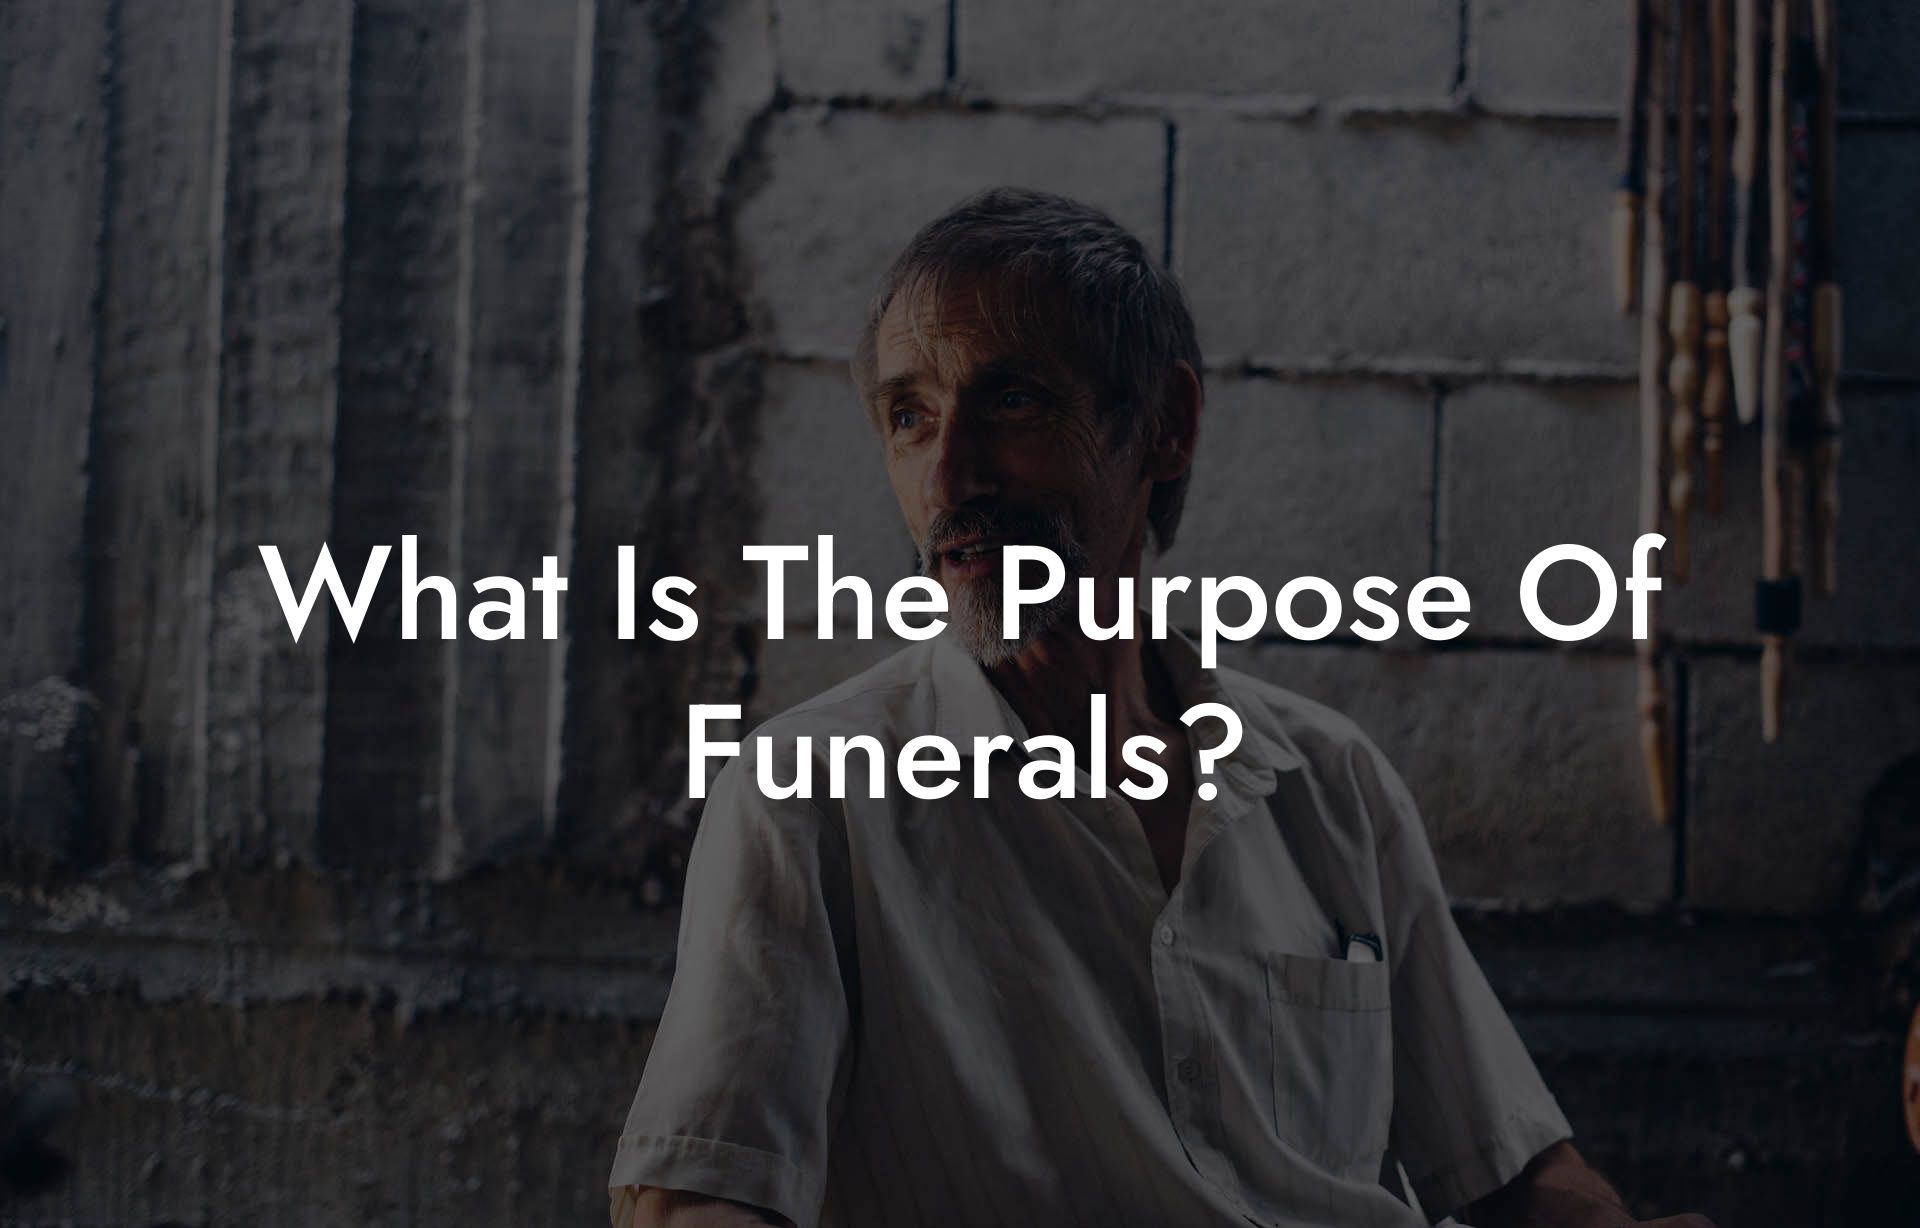 What Is The Purpose Of Funerals?